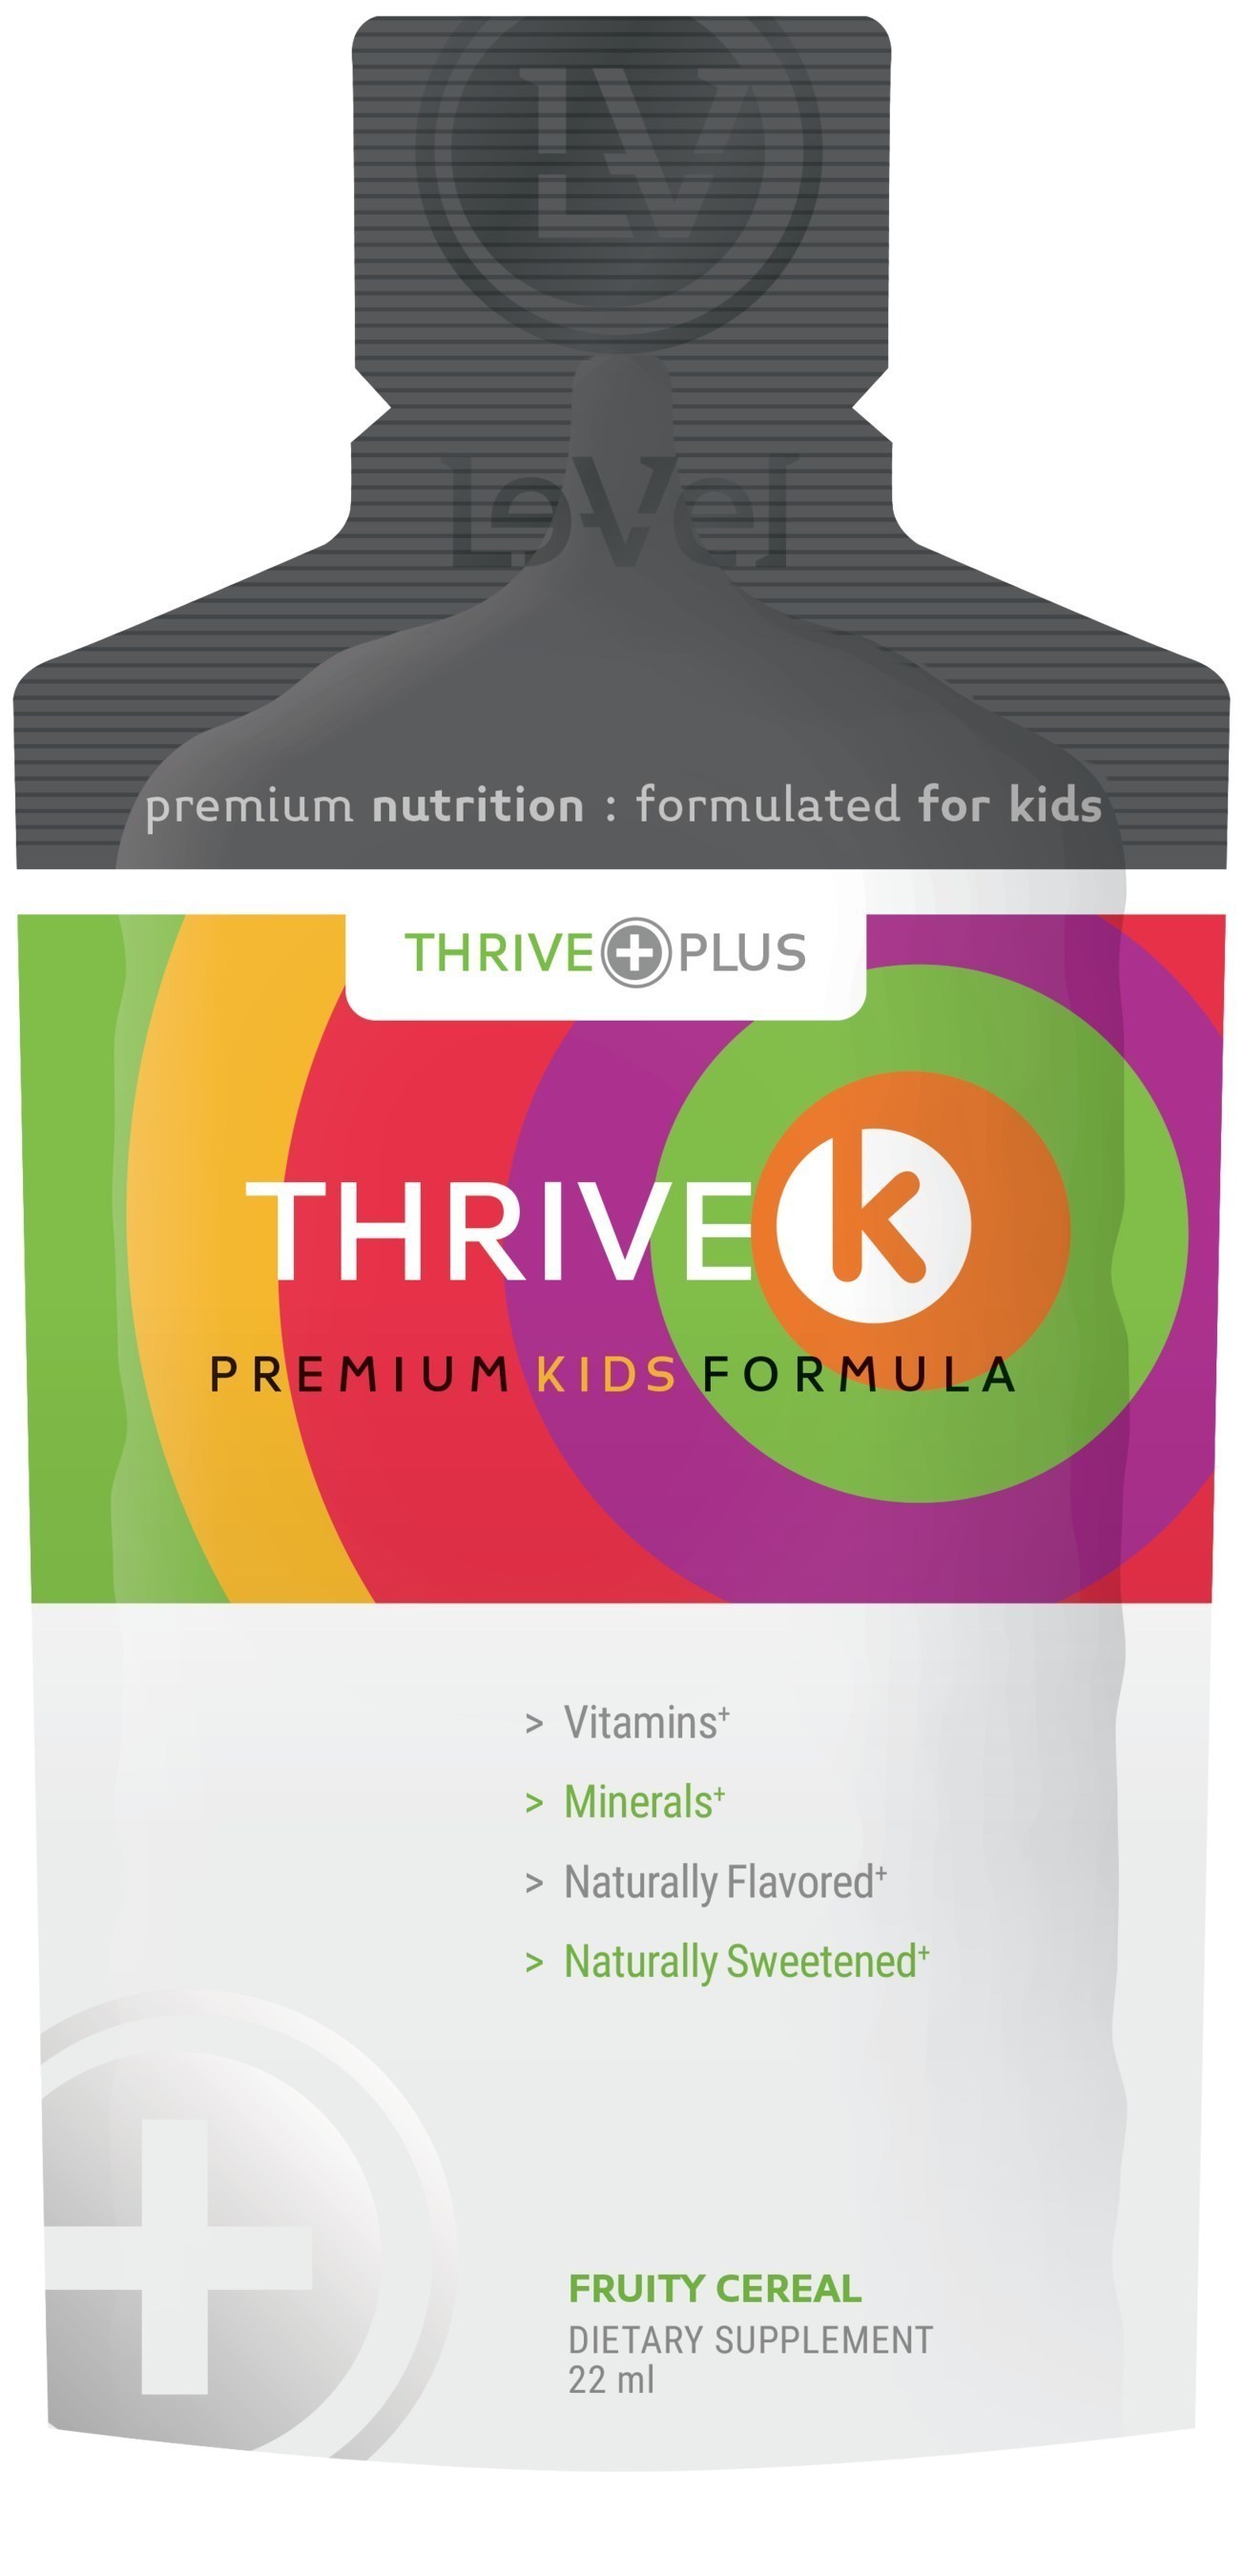 THRIVE K for Kids, a new great-tasting proprietary children's multivitamin and mineral blend in an easily consumable gel form.